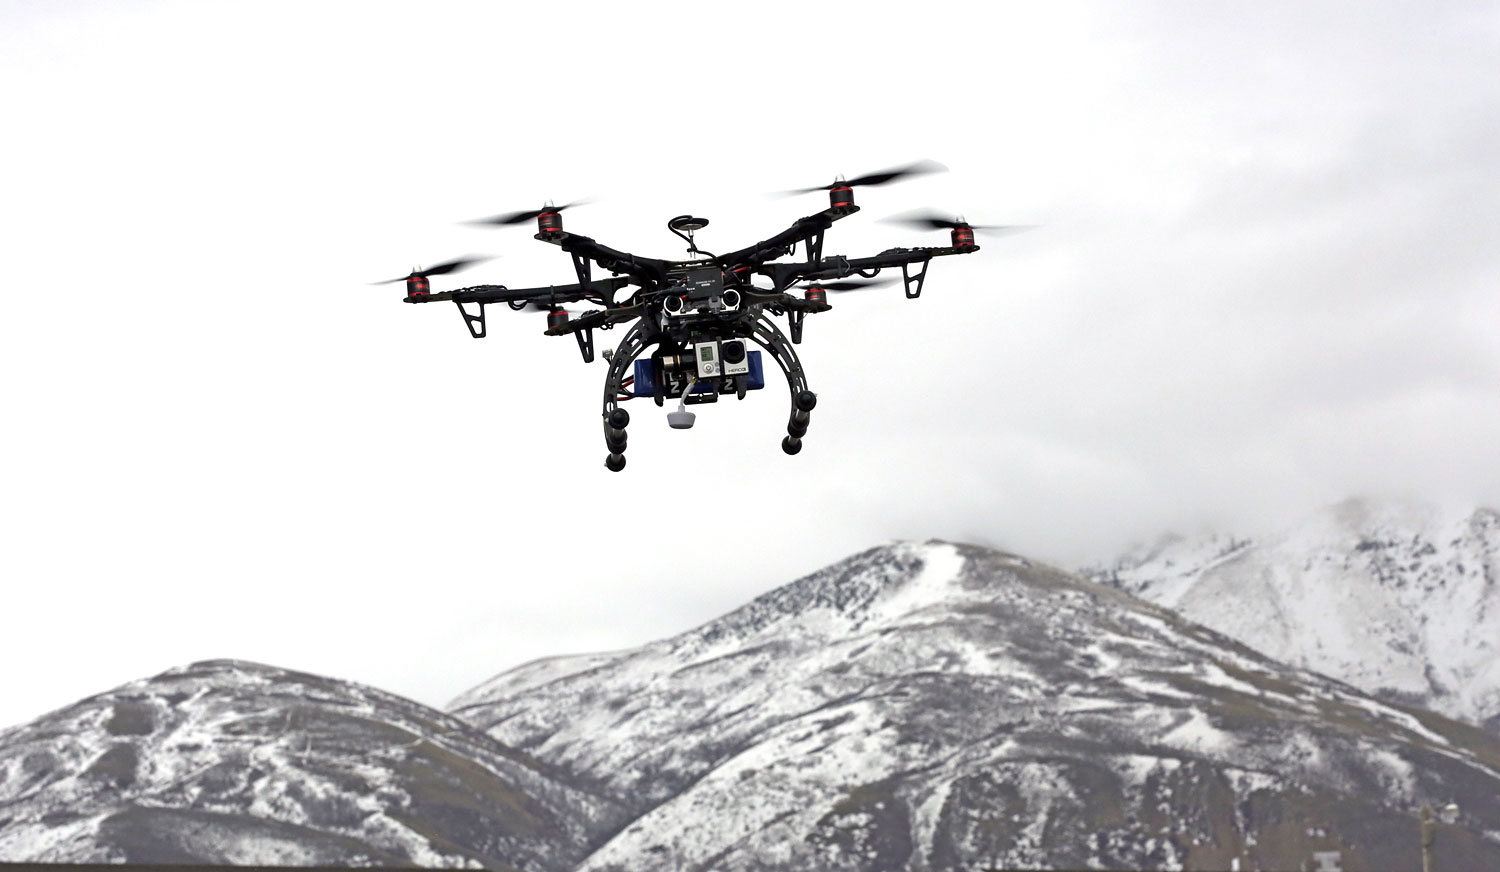 A drone is flown during a demonstration, in Brigham City, Utah, on Feb. 13, 2014 (Rick Bowmer—AP)